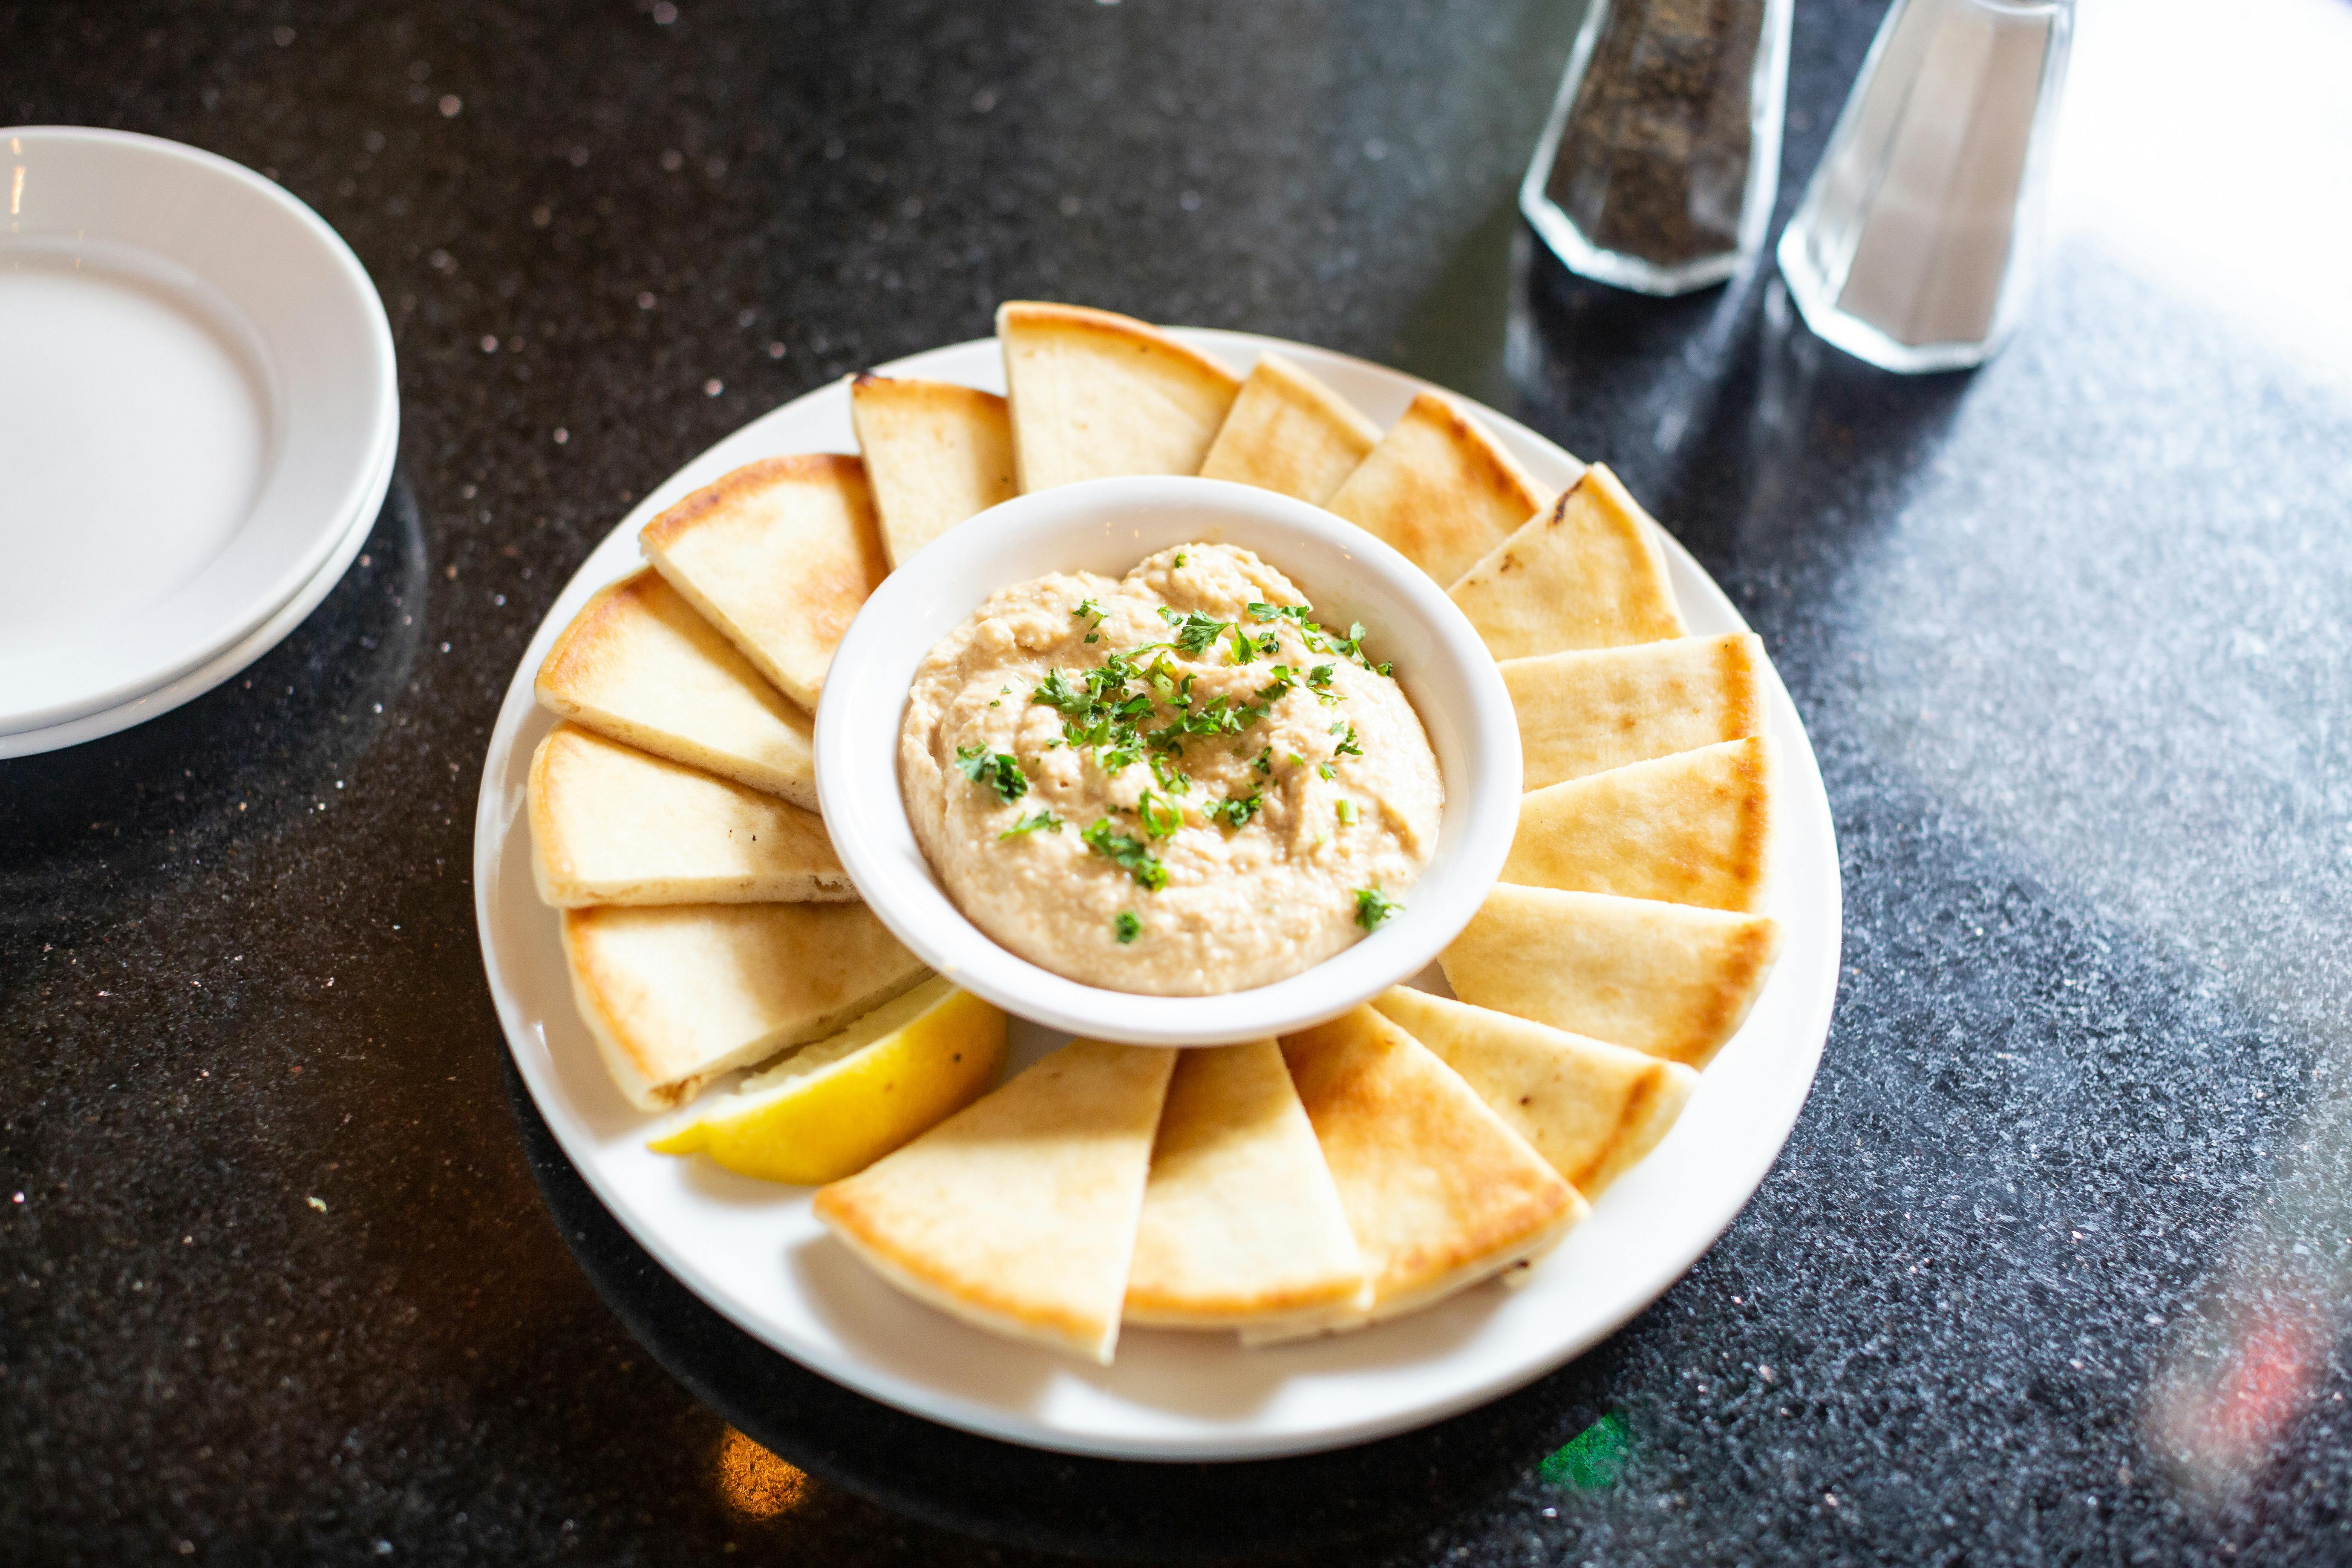 Hummus Dip from The Mad Greek in Lawrence, KS